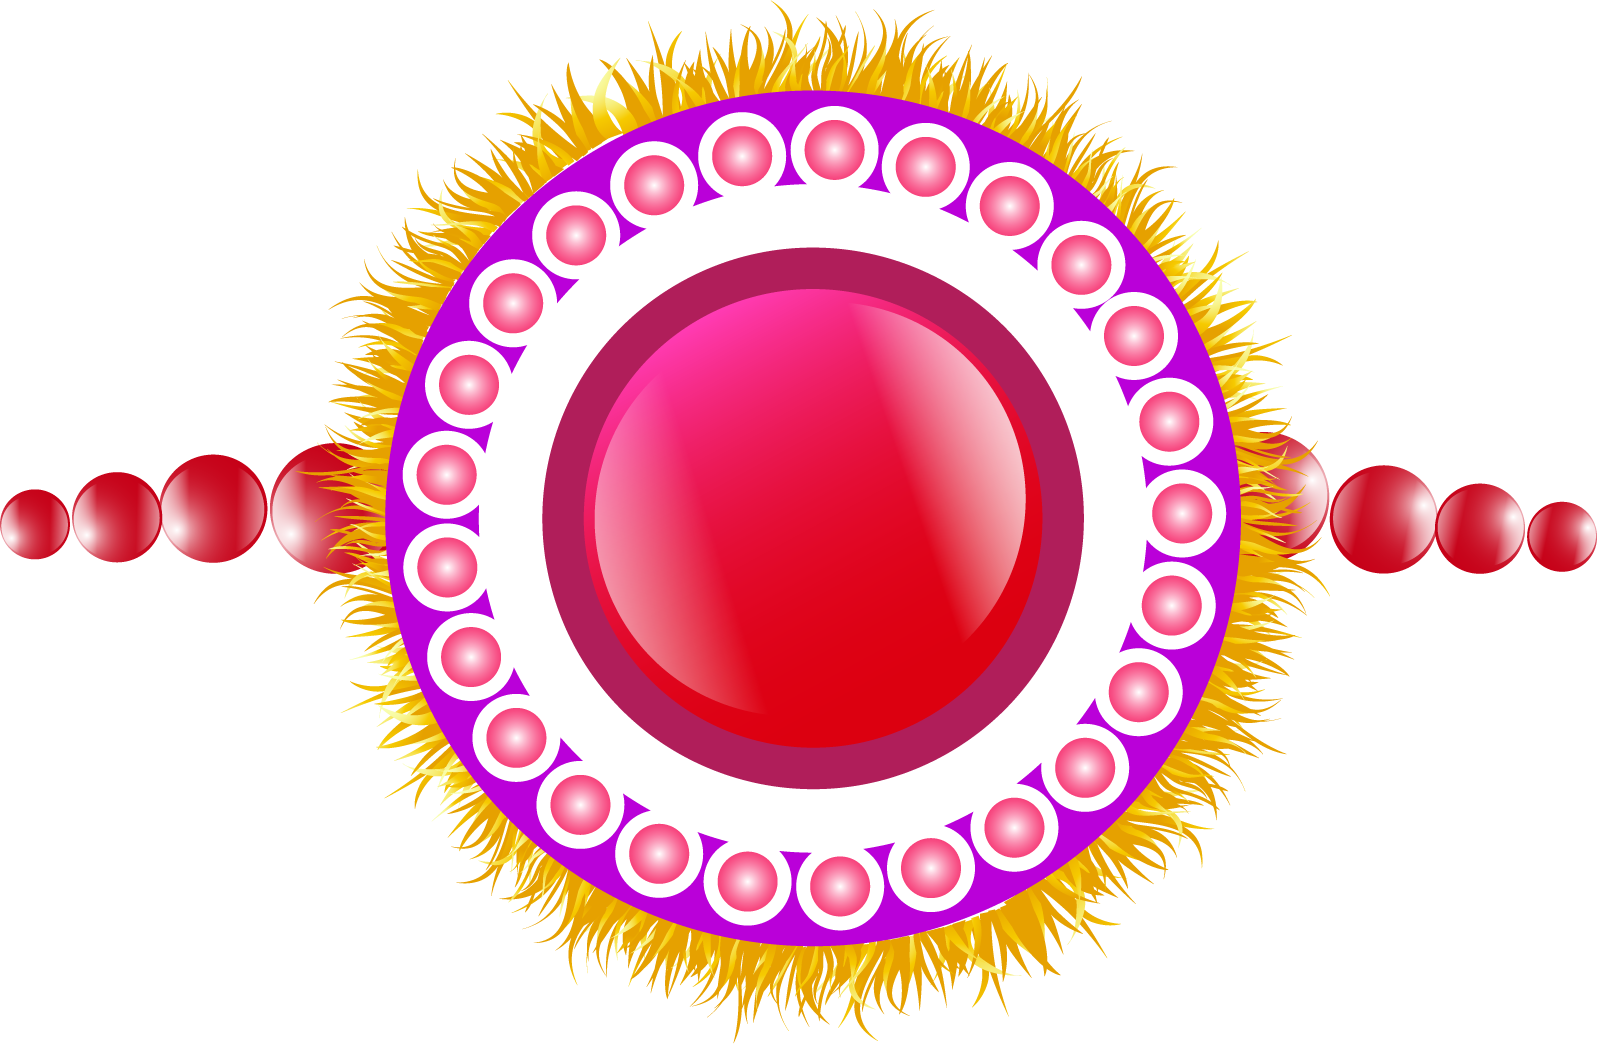 A Round Object With A Red Center